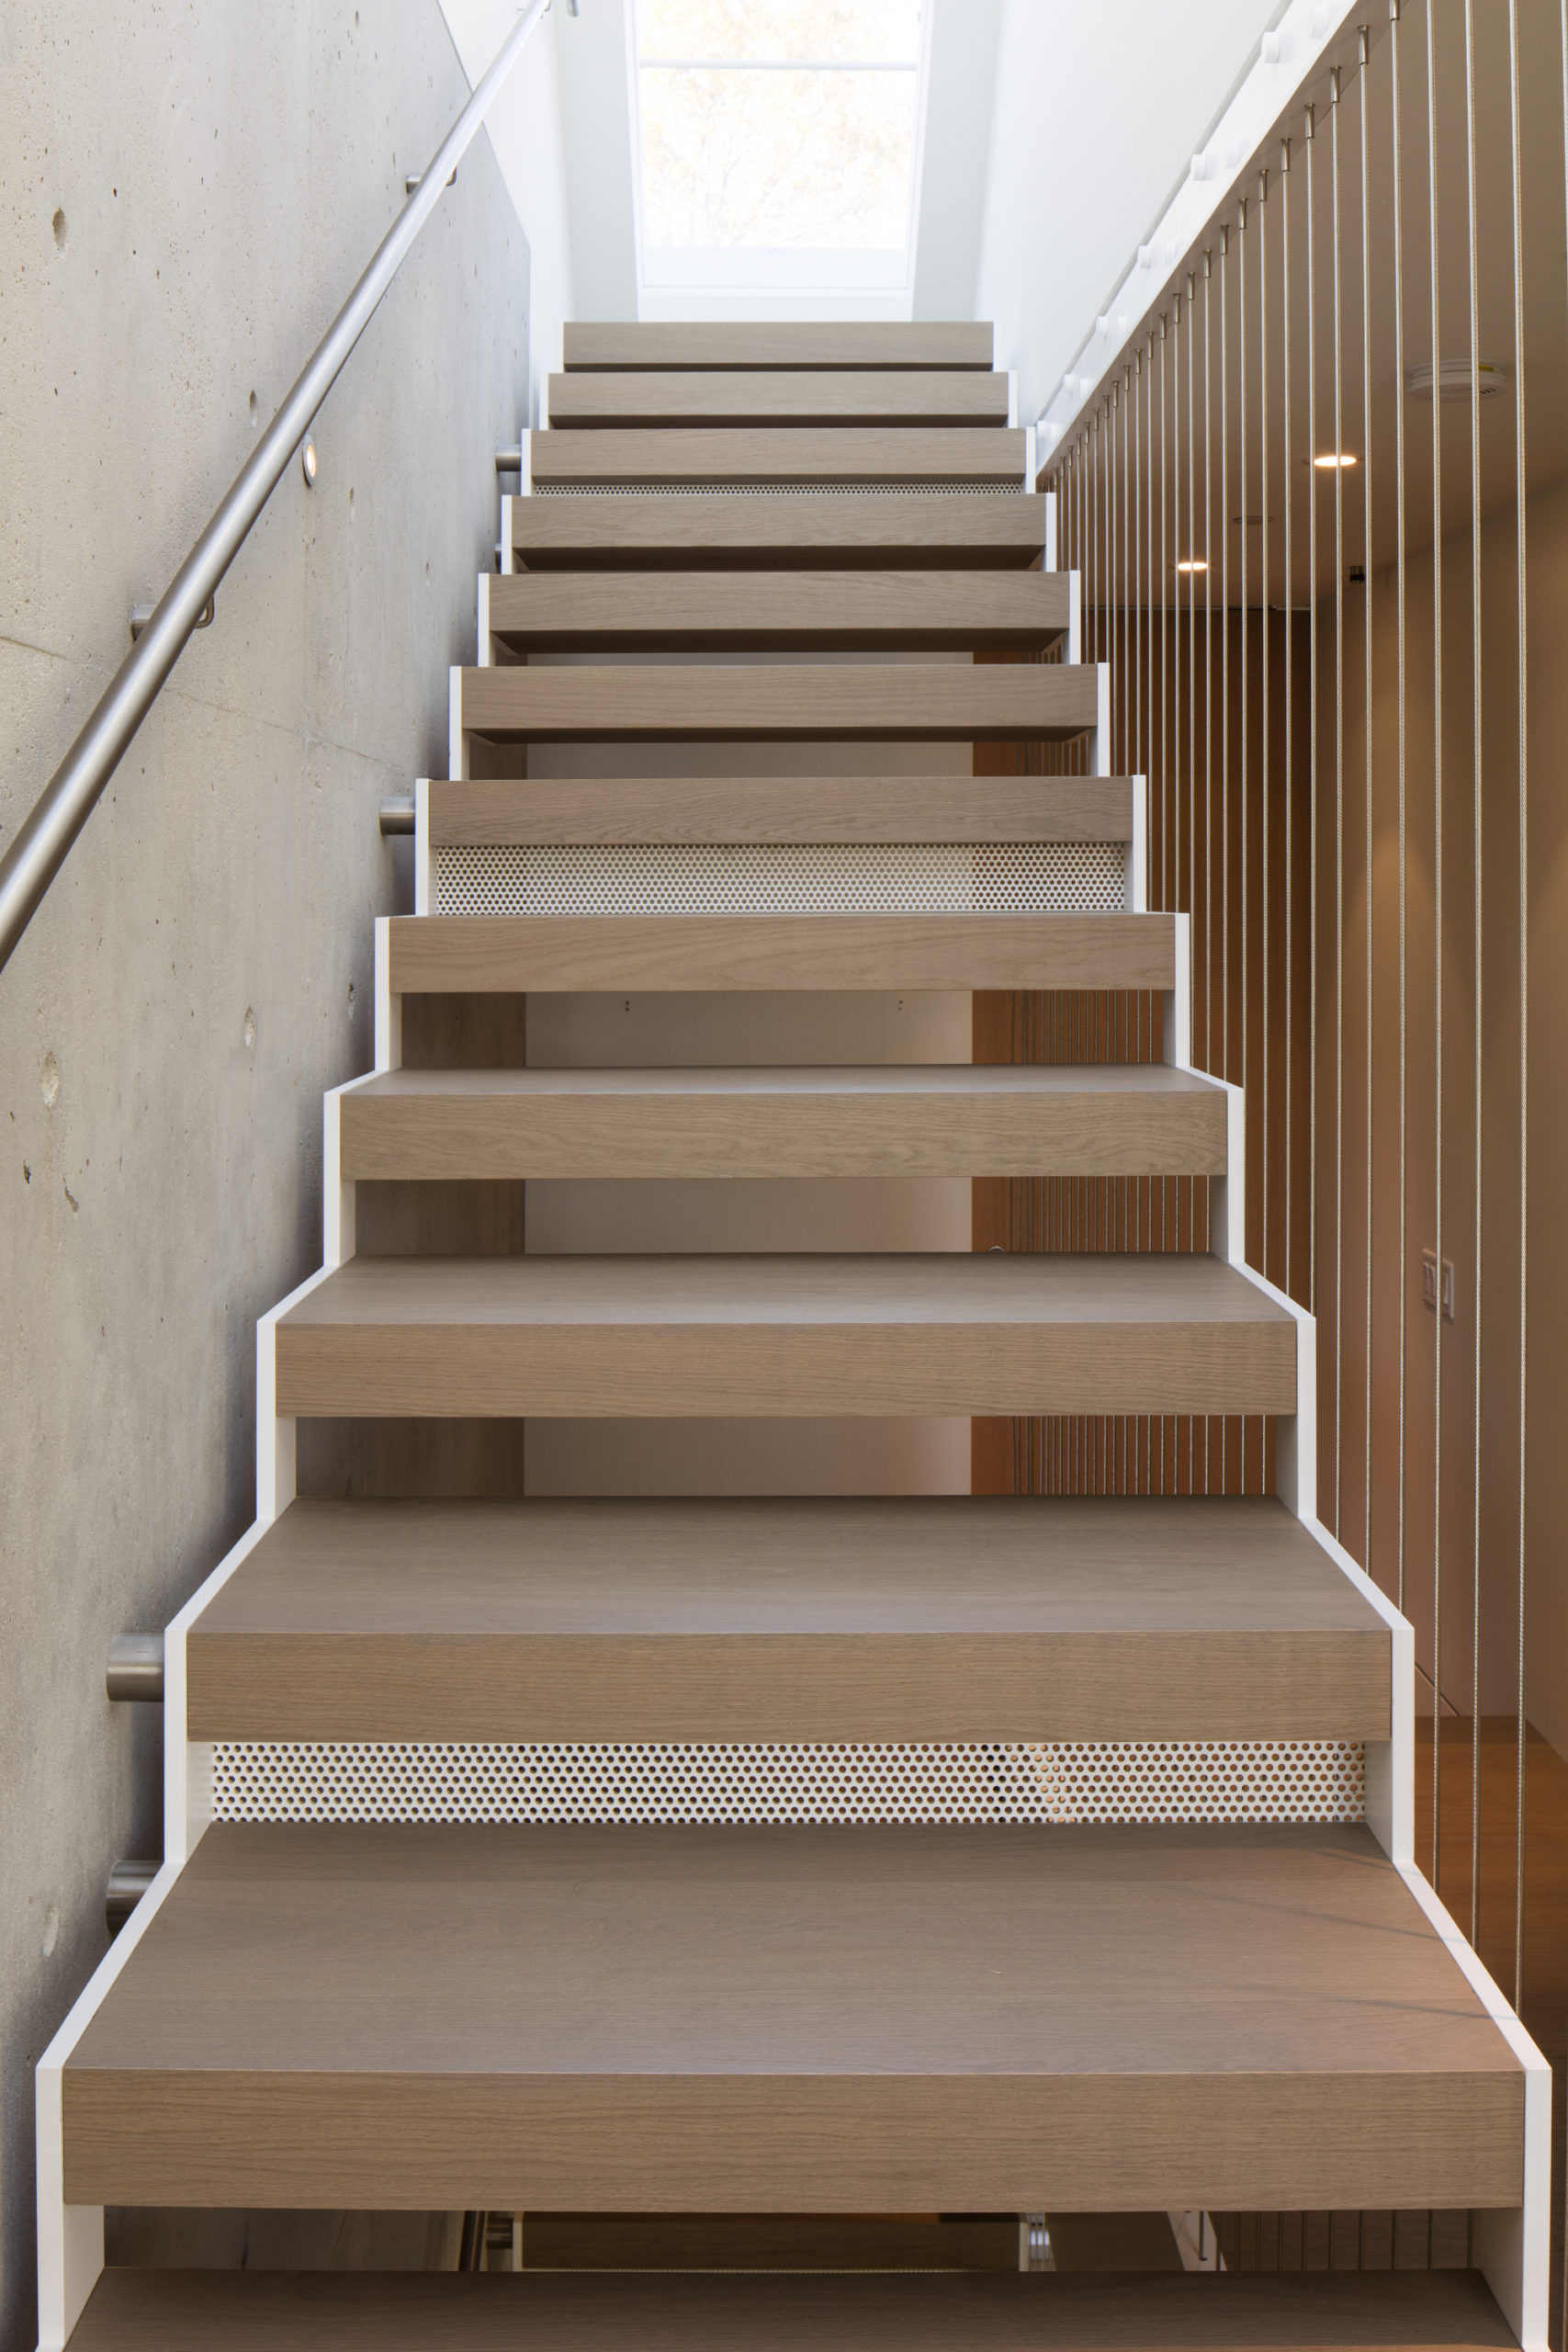 Contemporary stairs with a minimalist design at a custom home in Vancouver.